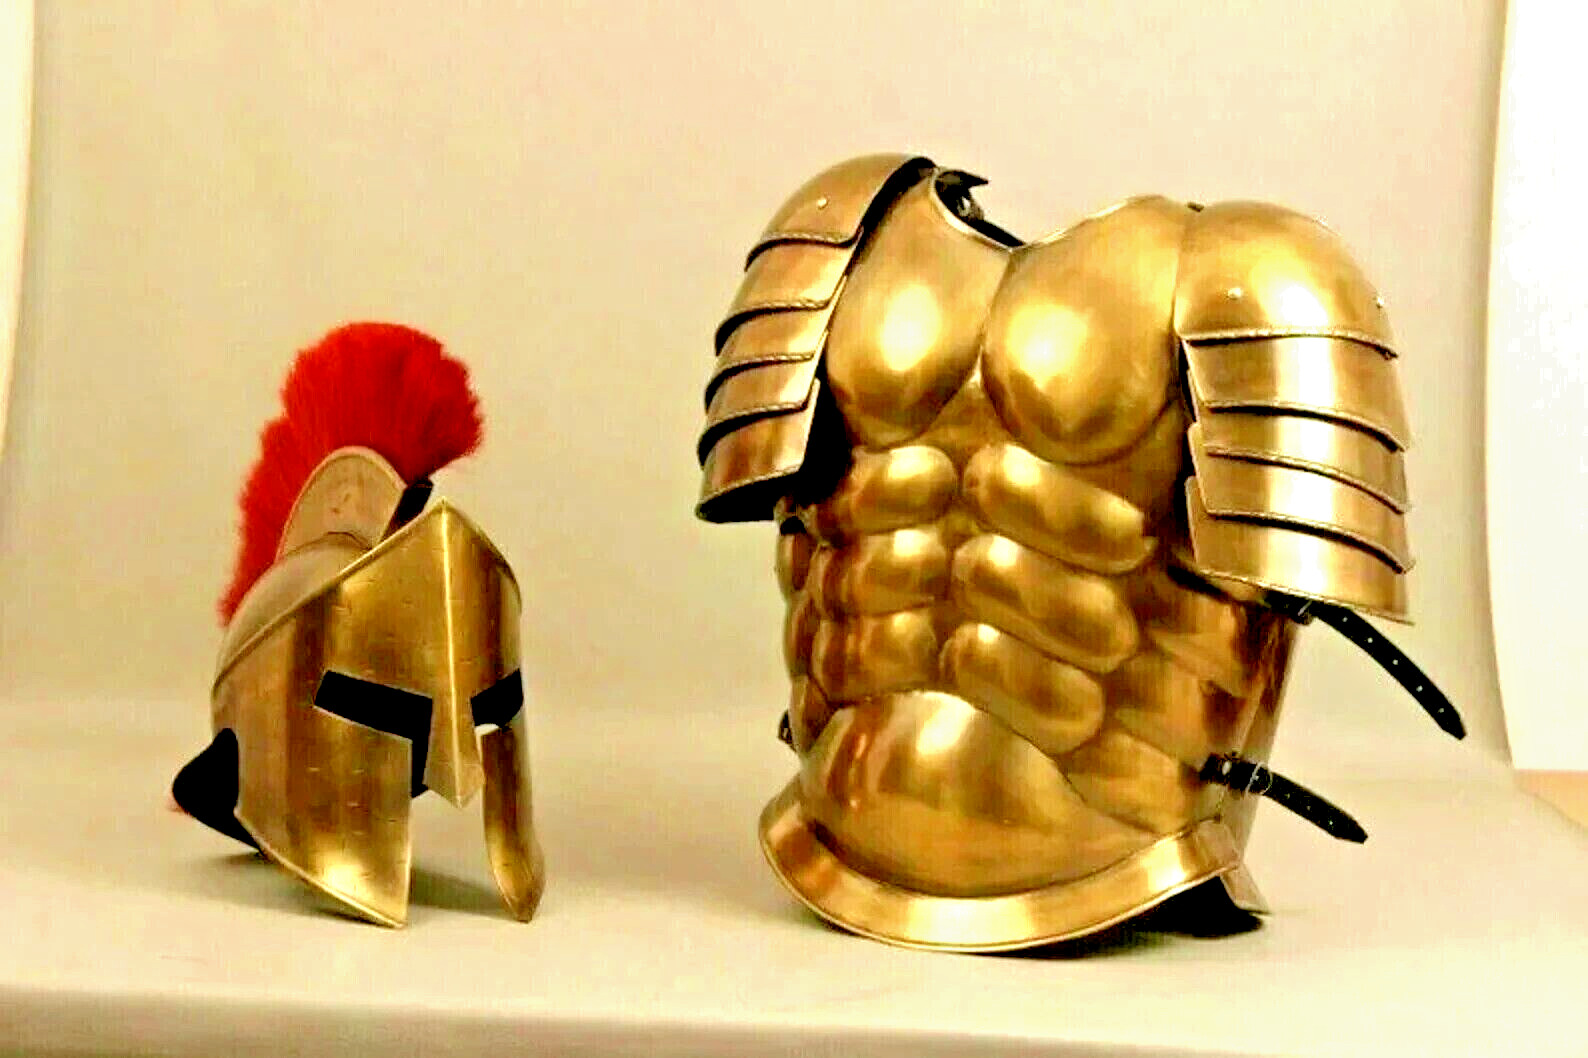 King Medieval 300 Spartan Roman Helmet With Muscle Jacket R/P Roman Costumes